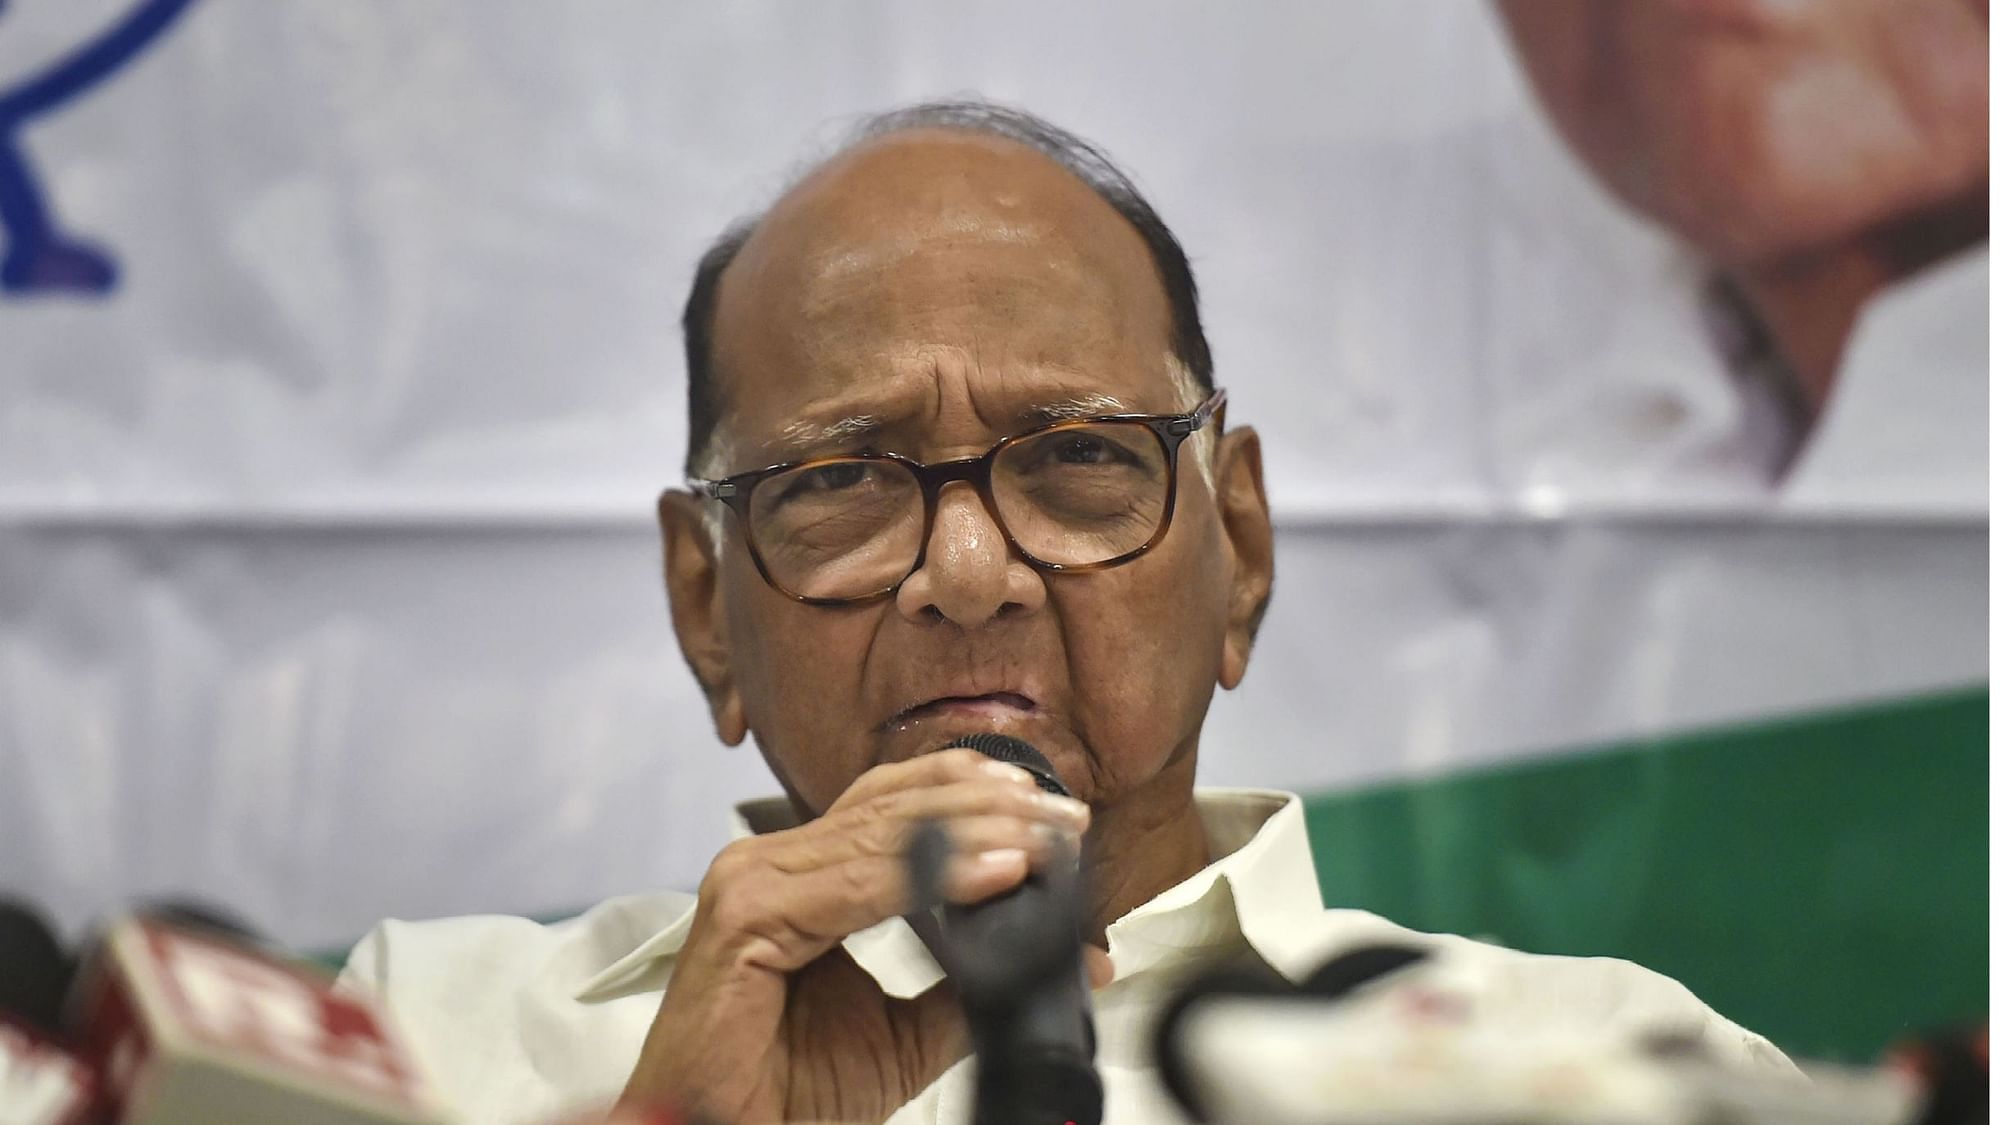 The ED had filed a PMLA case against Sharad Pawar, his nephew and others on 23 September.